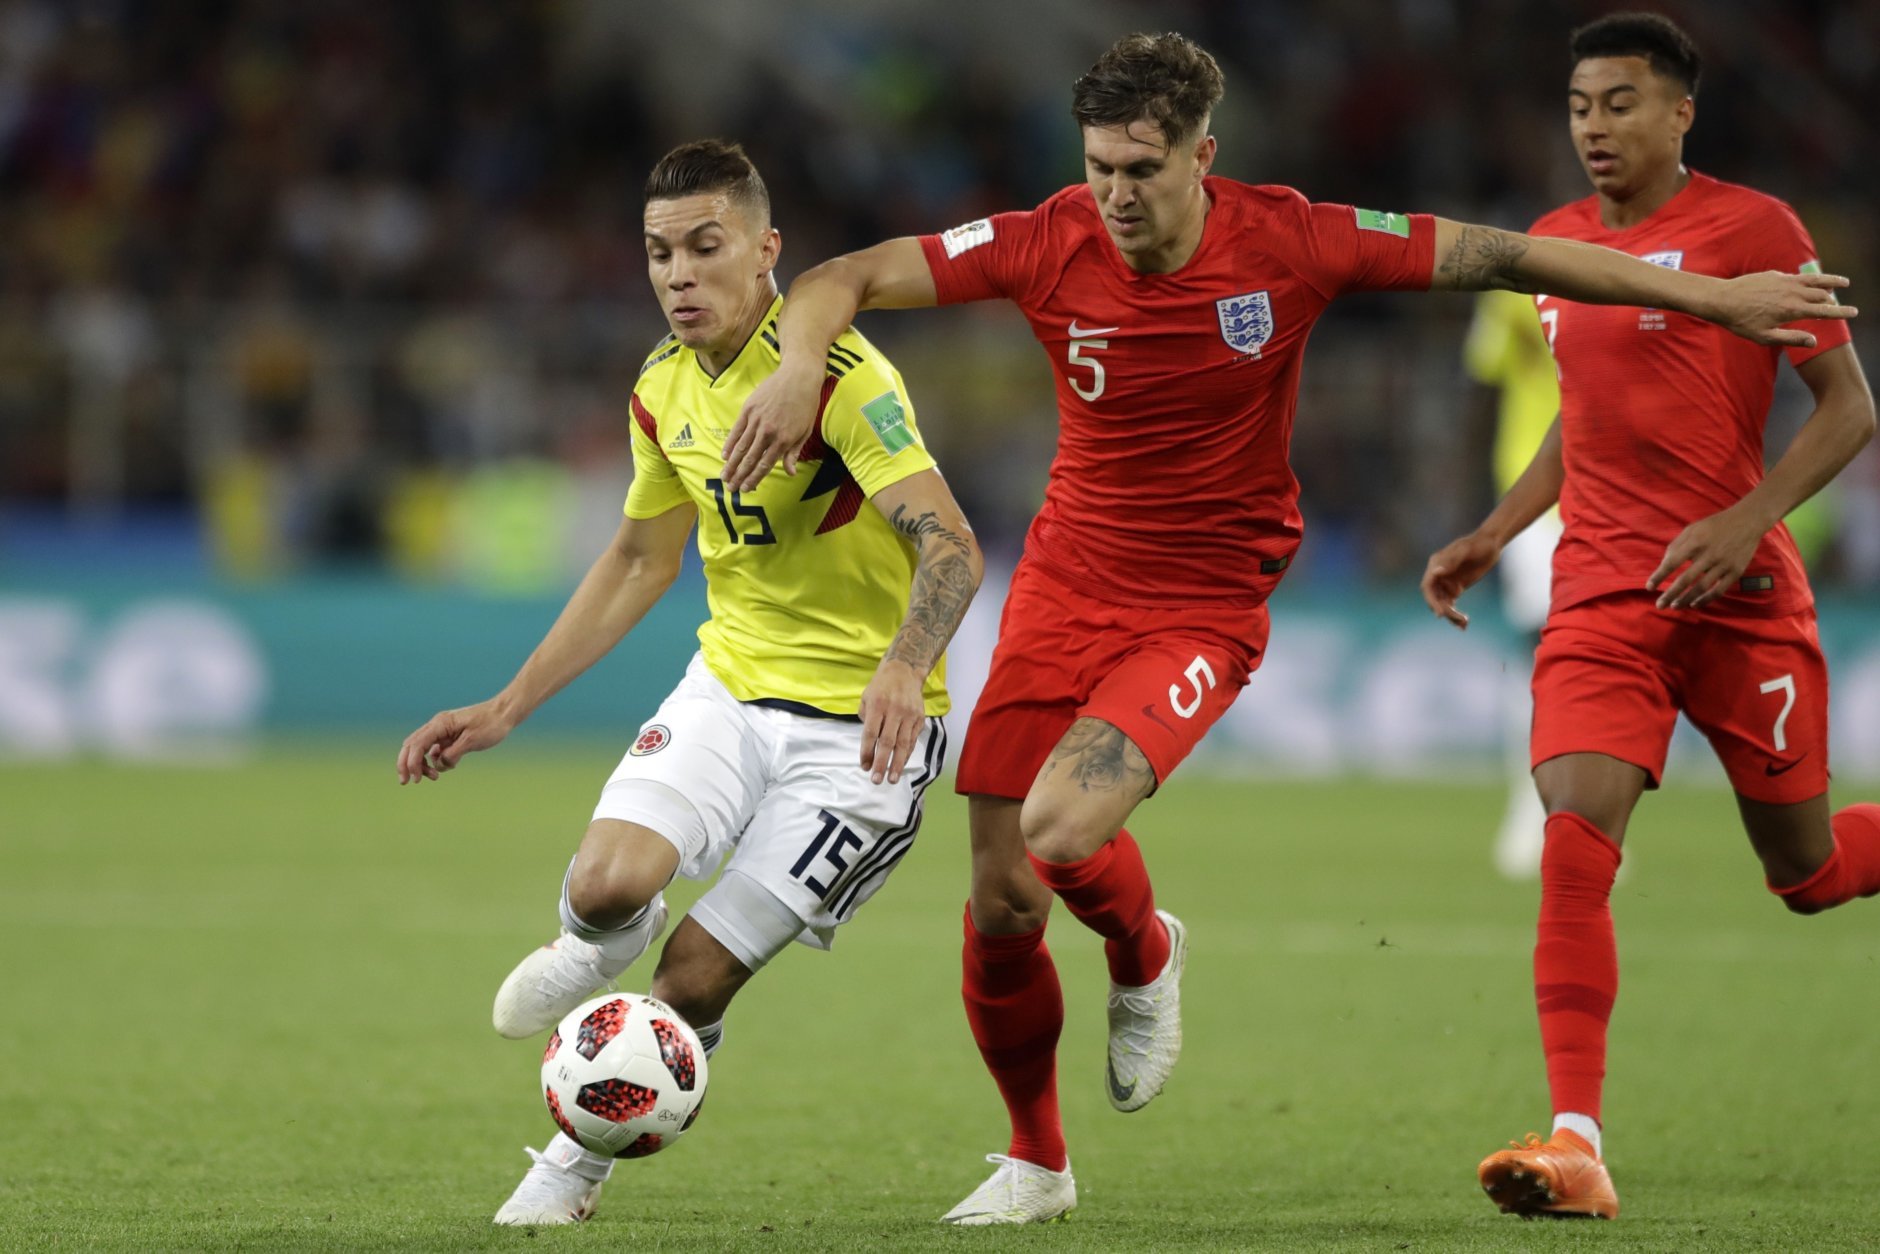 Colombia's Mateus Uribe, left, and England's John Stones fight for the ball during the round of 16 match between Colombia and England at the 2018 soccer World Cup in the Spartak Stadium, in Moscow, Russia, Tuesday, July 3, 2018. (AP Photo/Matthias Schrader)